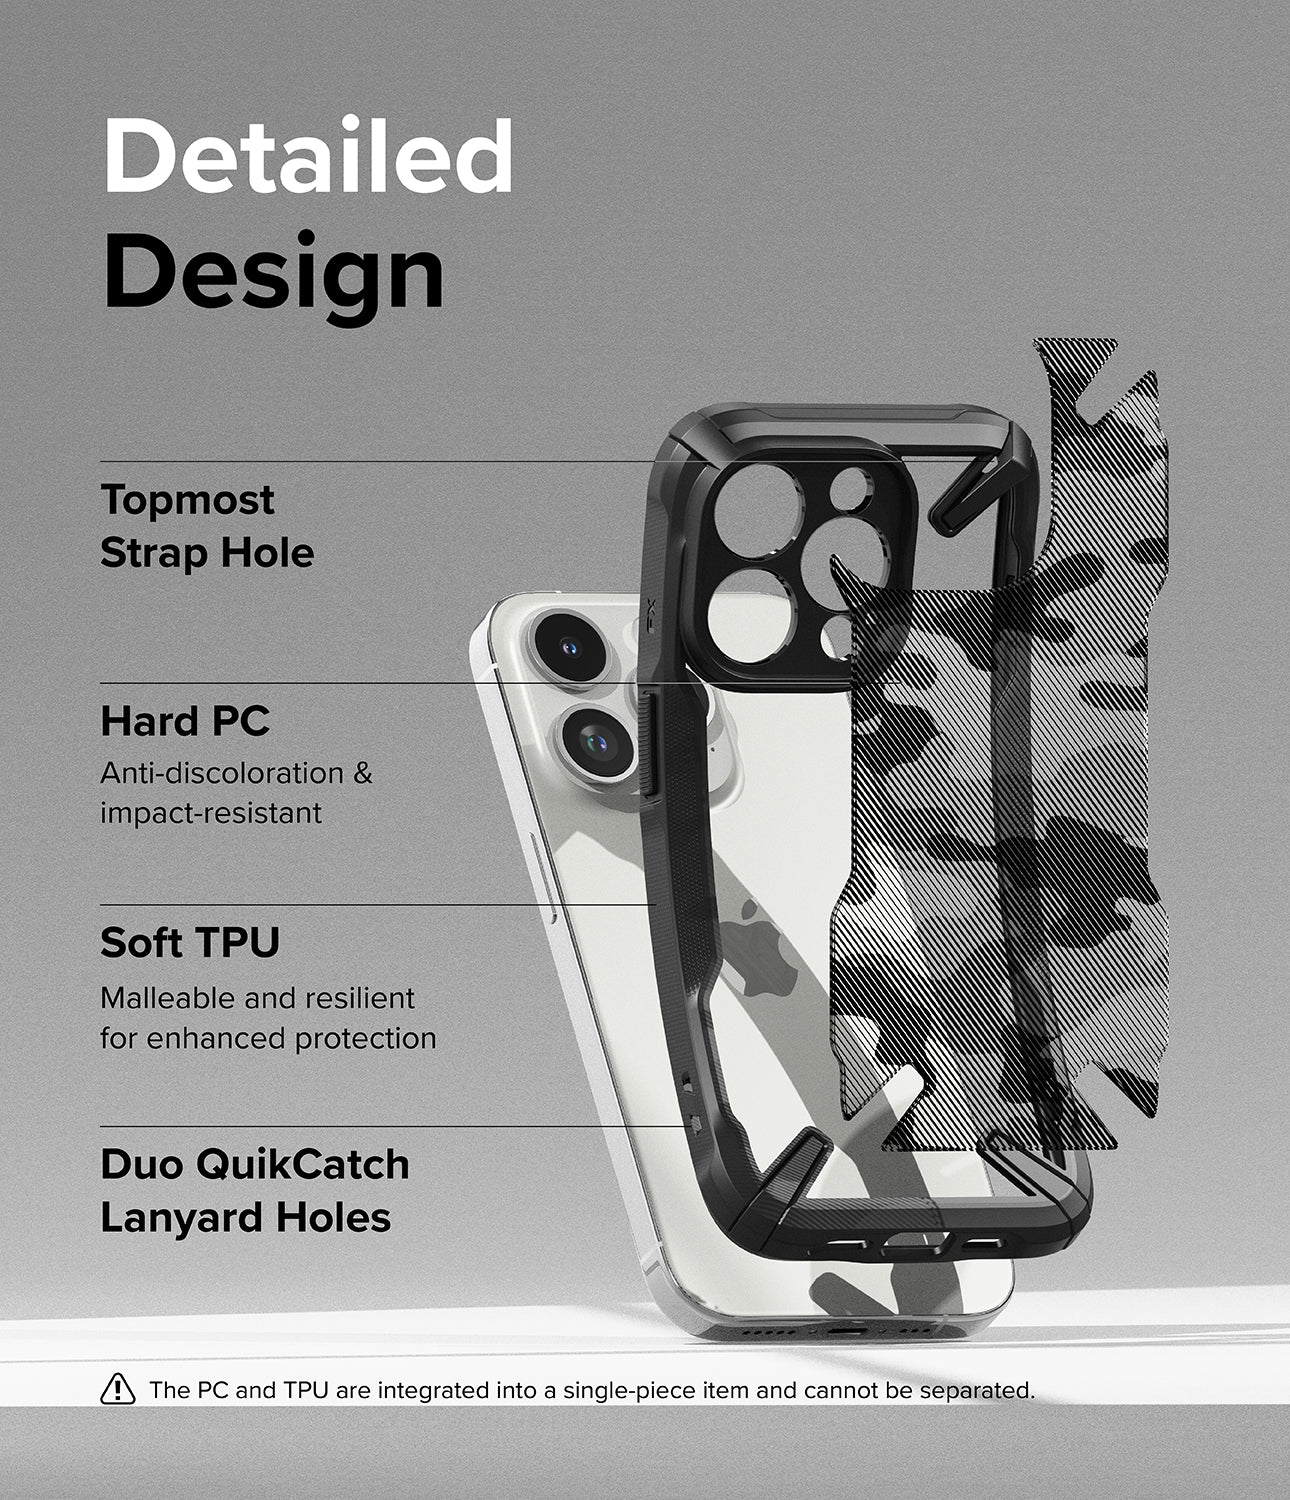 iPhone 15 Pro Max Case | Fusion-X Camo Black - Detailed Design. Topmost Strap Hole. Anti-discoloration and impact-resistant with Hard PC. Malleable and resilient for enhanced protection with Soft TPU. Duo QuickCatch Lanyard Holes.